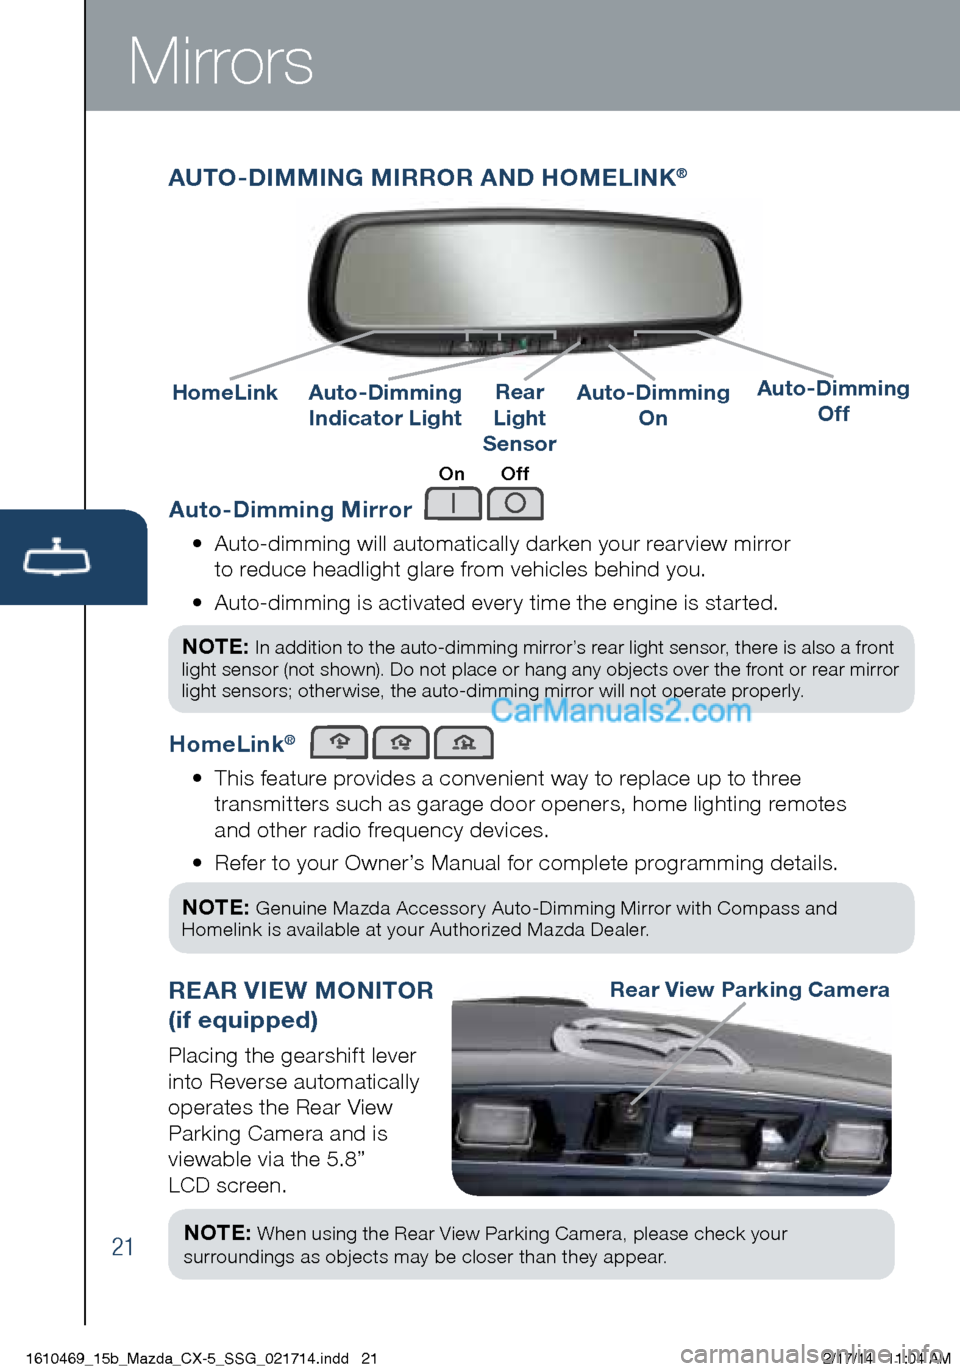 MAZDA MODEL CX-5 2015  Smart Start Guide (in English) Mirrors
Auto-Dimming Mirror
•   Auto-dimming will automatically darken your rearview mirror 
to reduce headlight glare from vehicles behind you. 
•    Auto-dimming is activated every time the engi